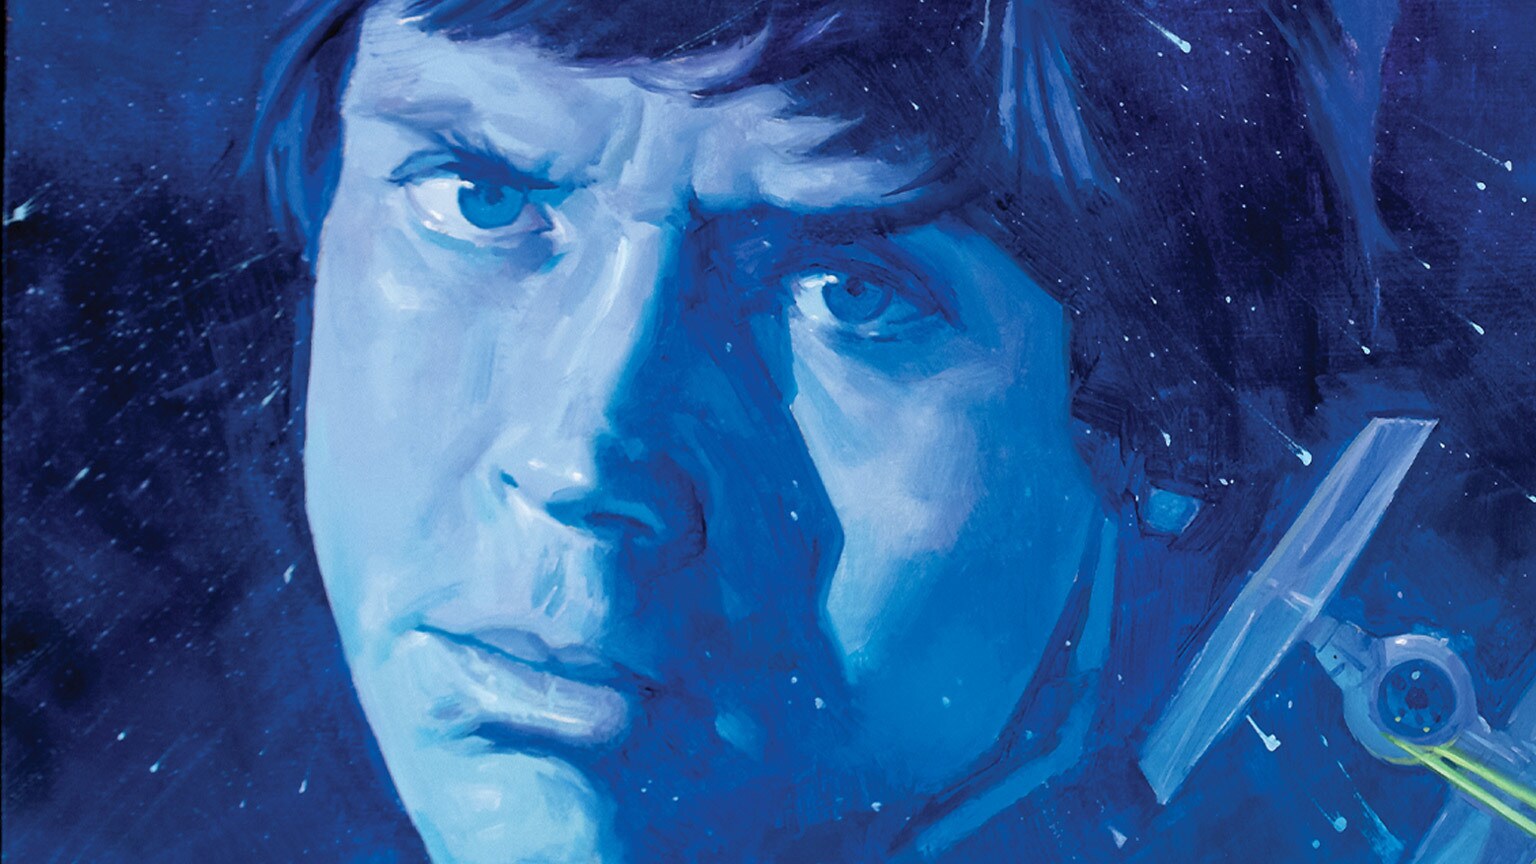 A Daring Death Star Escape in Marvel’s Star Wars #27 - Exclusive Preview